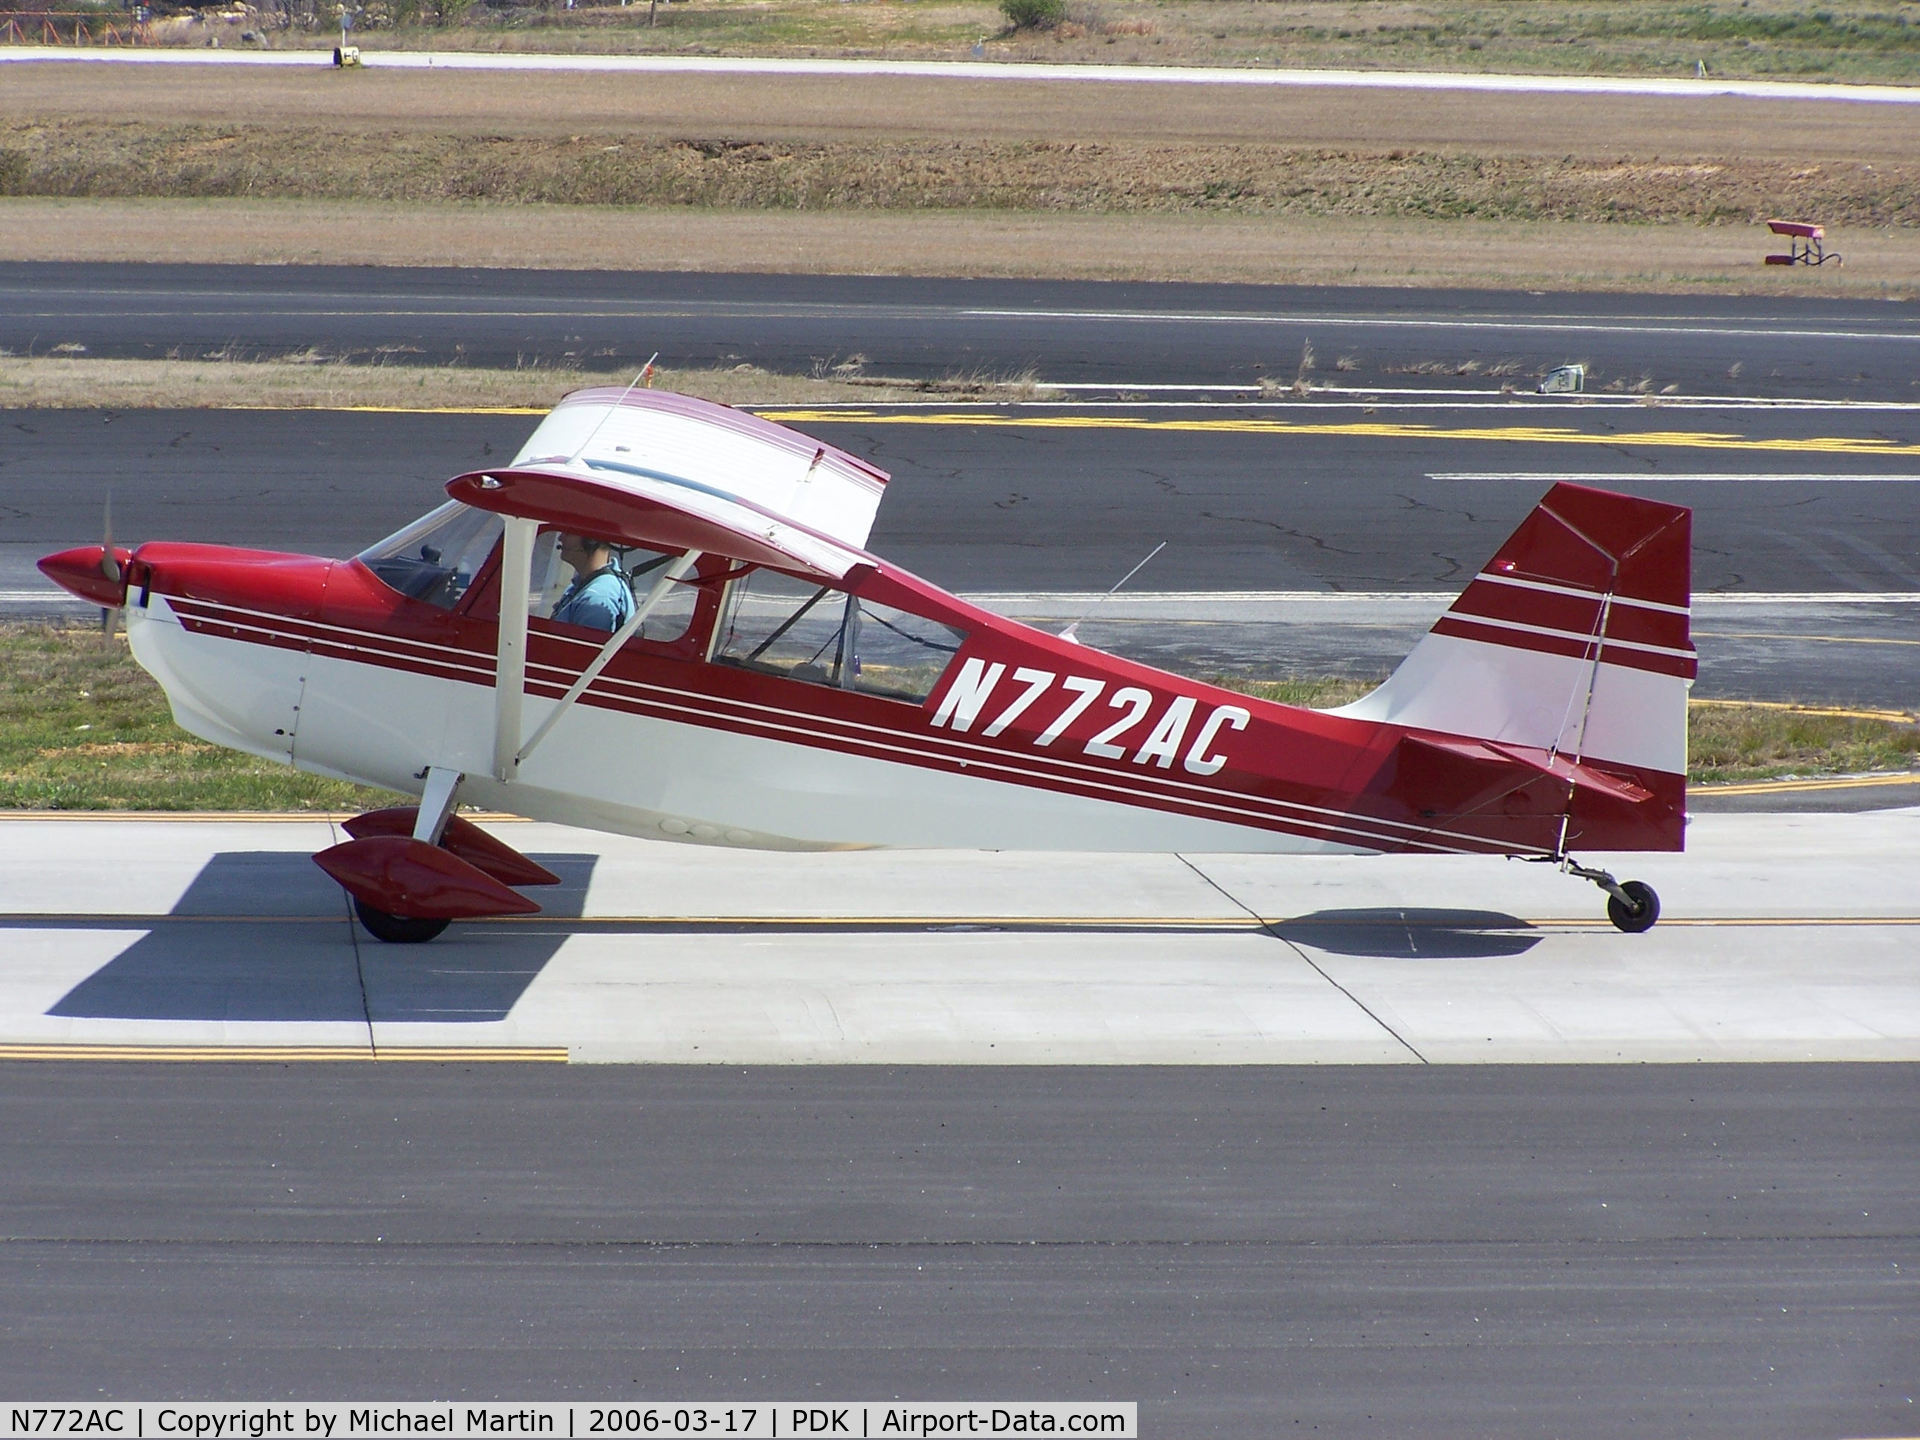 N772AC, 1996 American Champion 7GCBC C/N 1228-96, Taxing to Epps Air Service